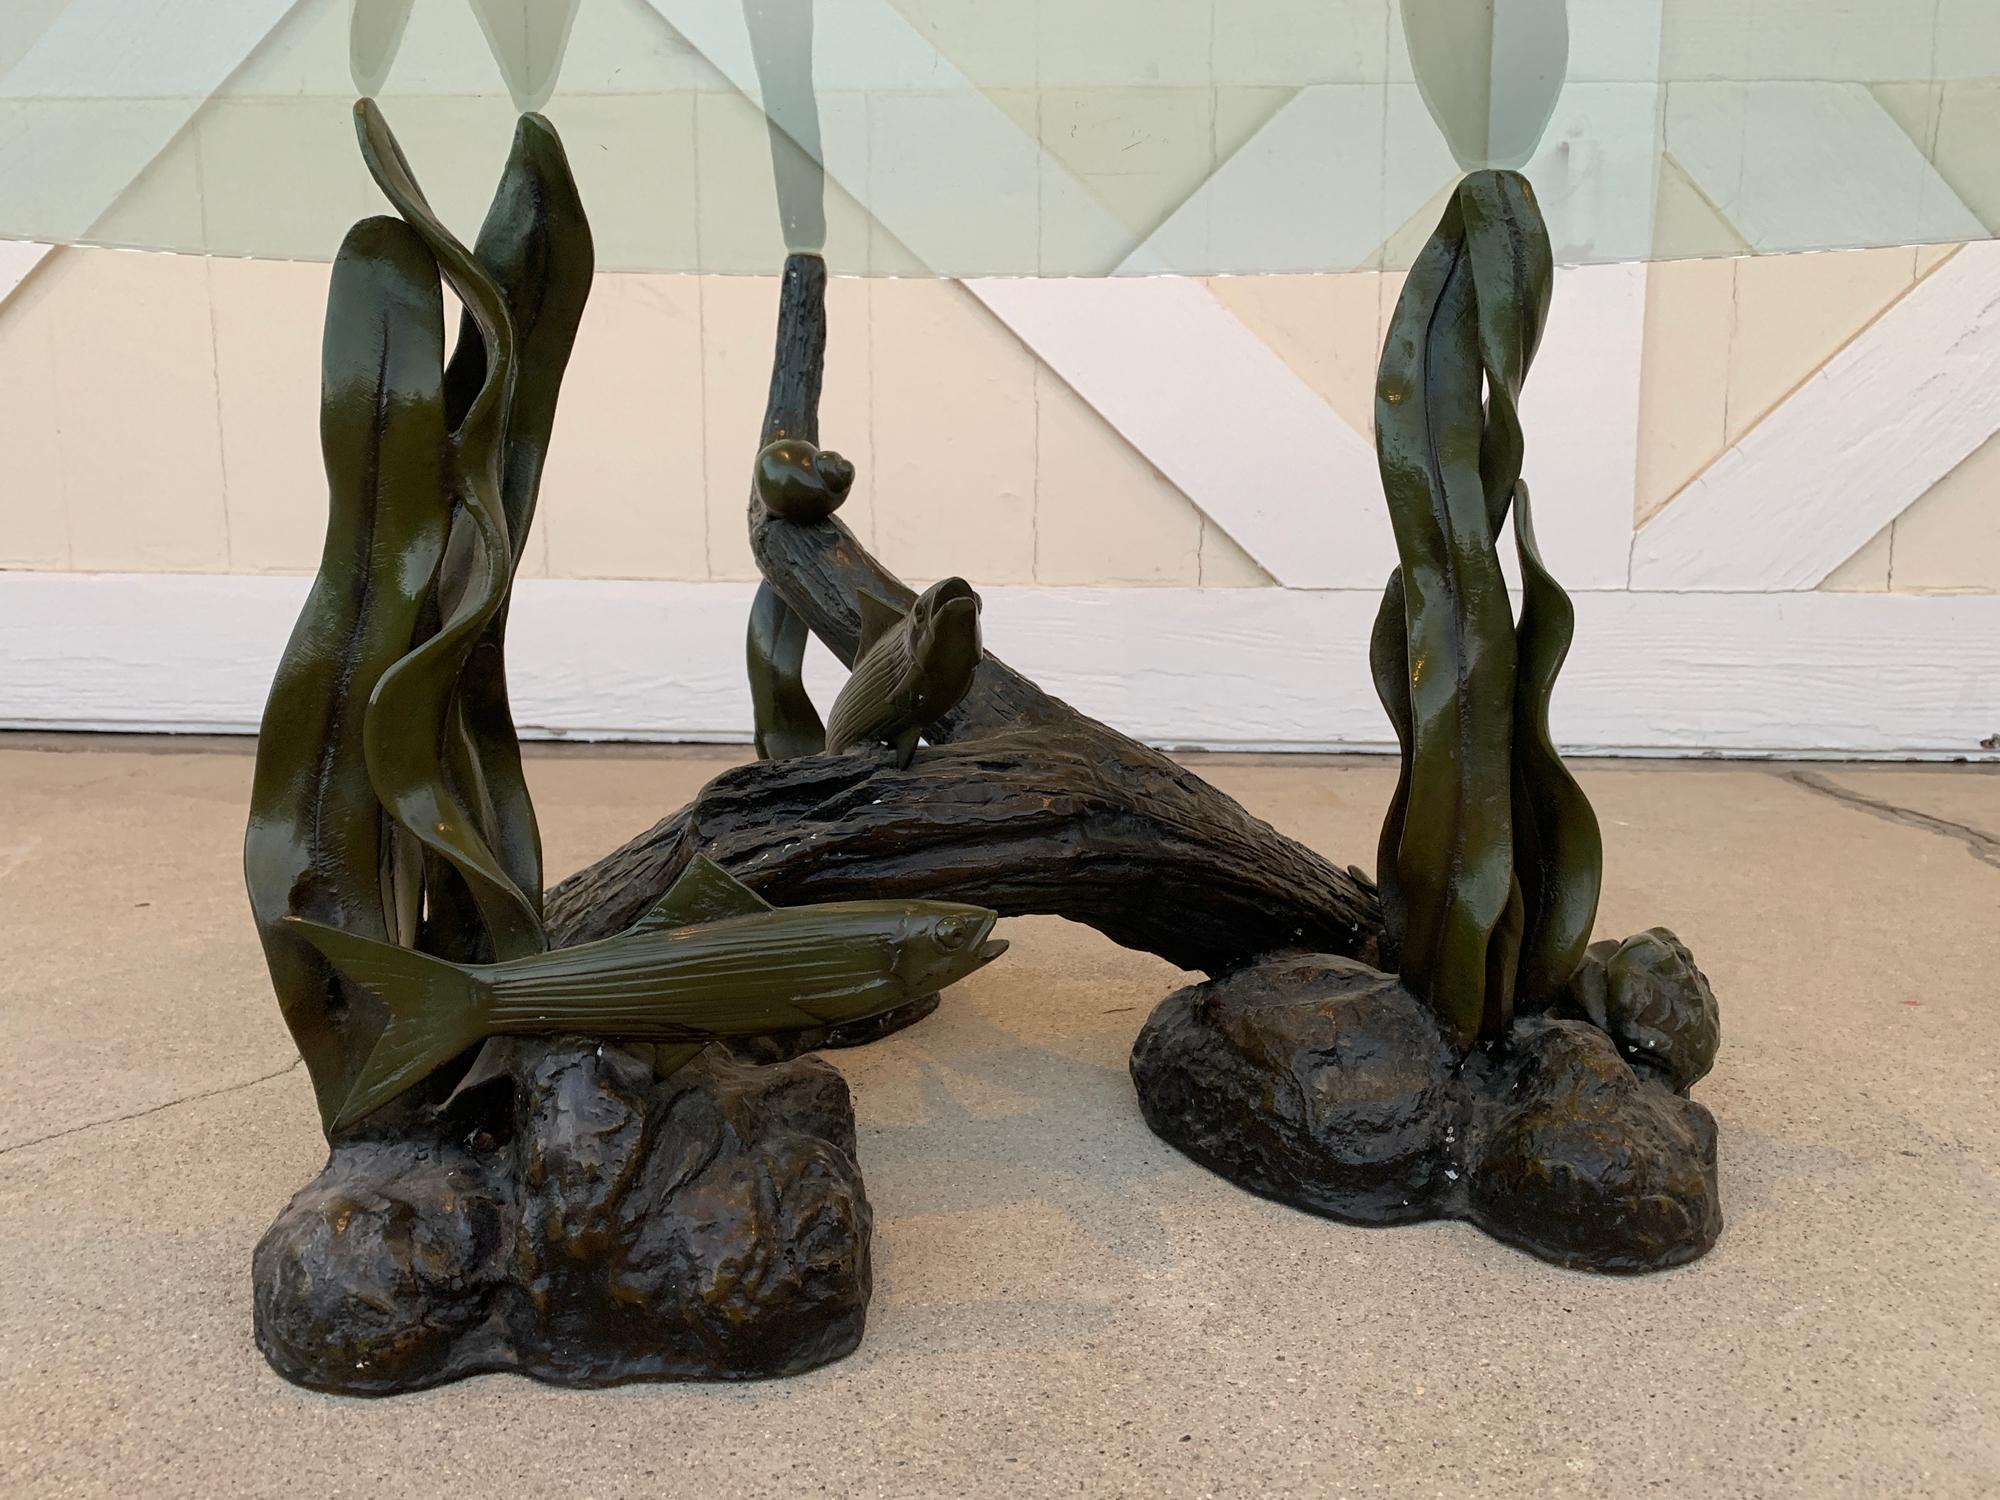 Beautiful bronze and glass coffee table depicting a sea creatures playing around a piece of coral and sea weed leaves, there you can see a couple of fish, snails, clams and a sea star.

The bronze has beautiful patina and a glossy finish to mimic